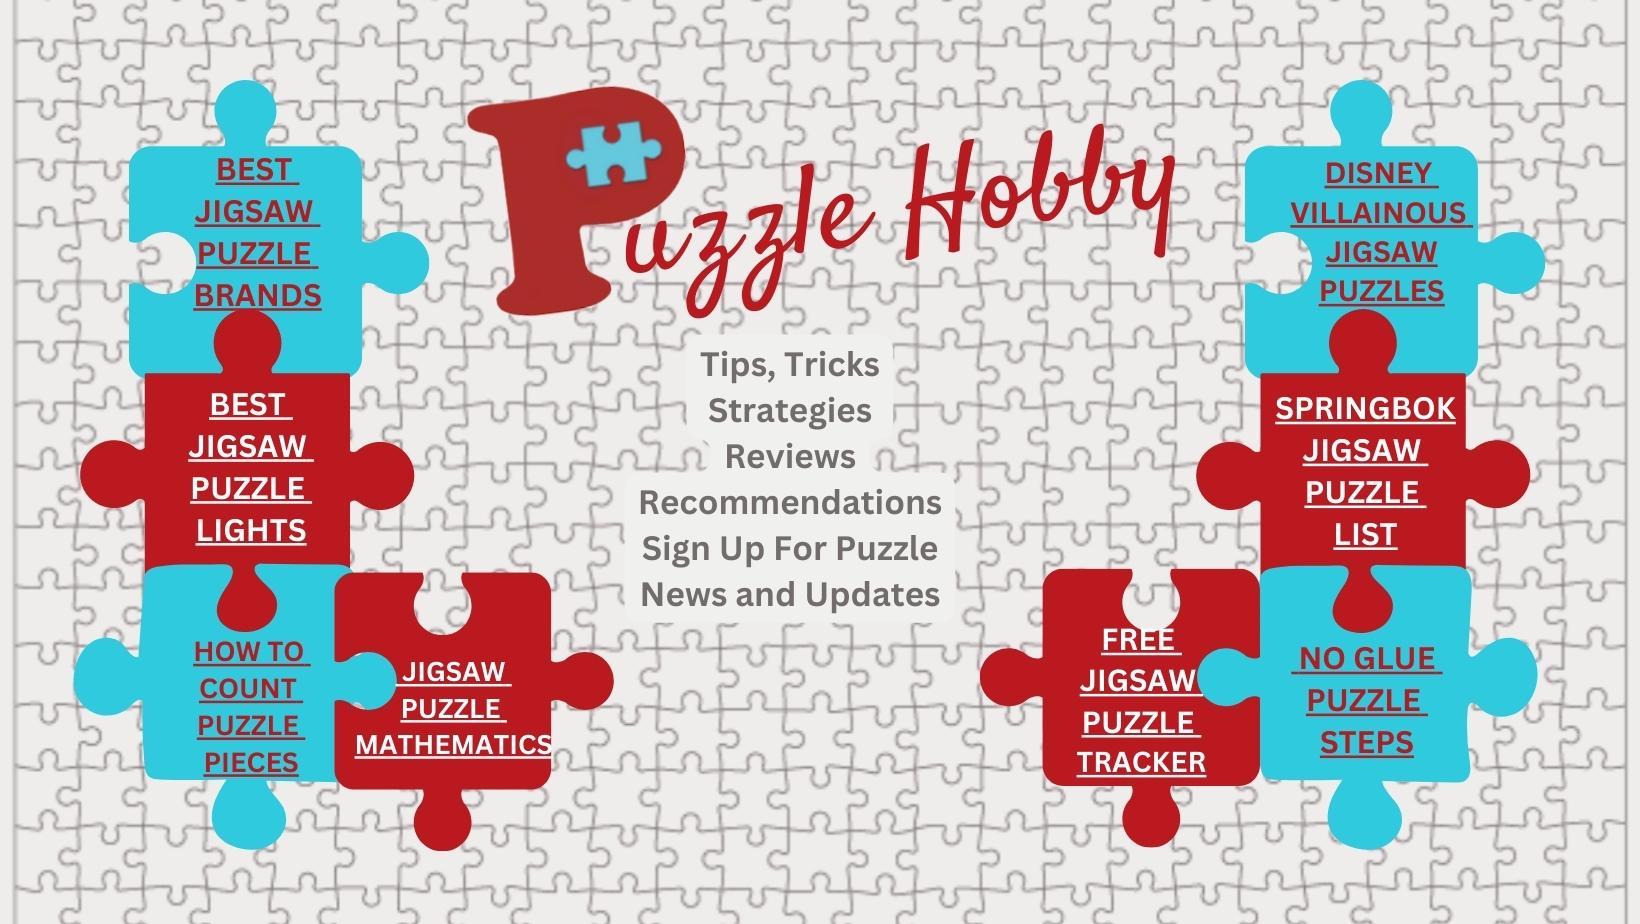 Easy DIY Puzzle Maker - New and factory sealed